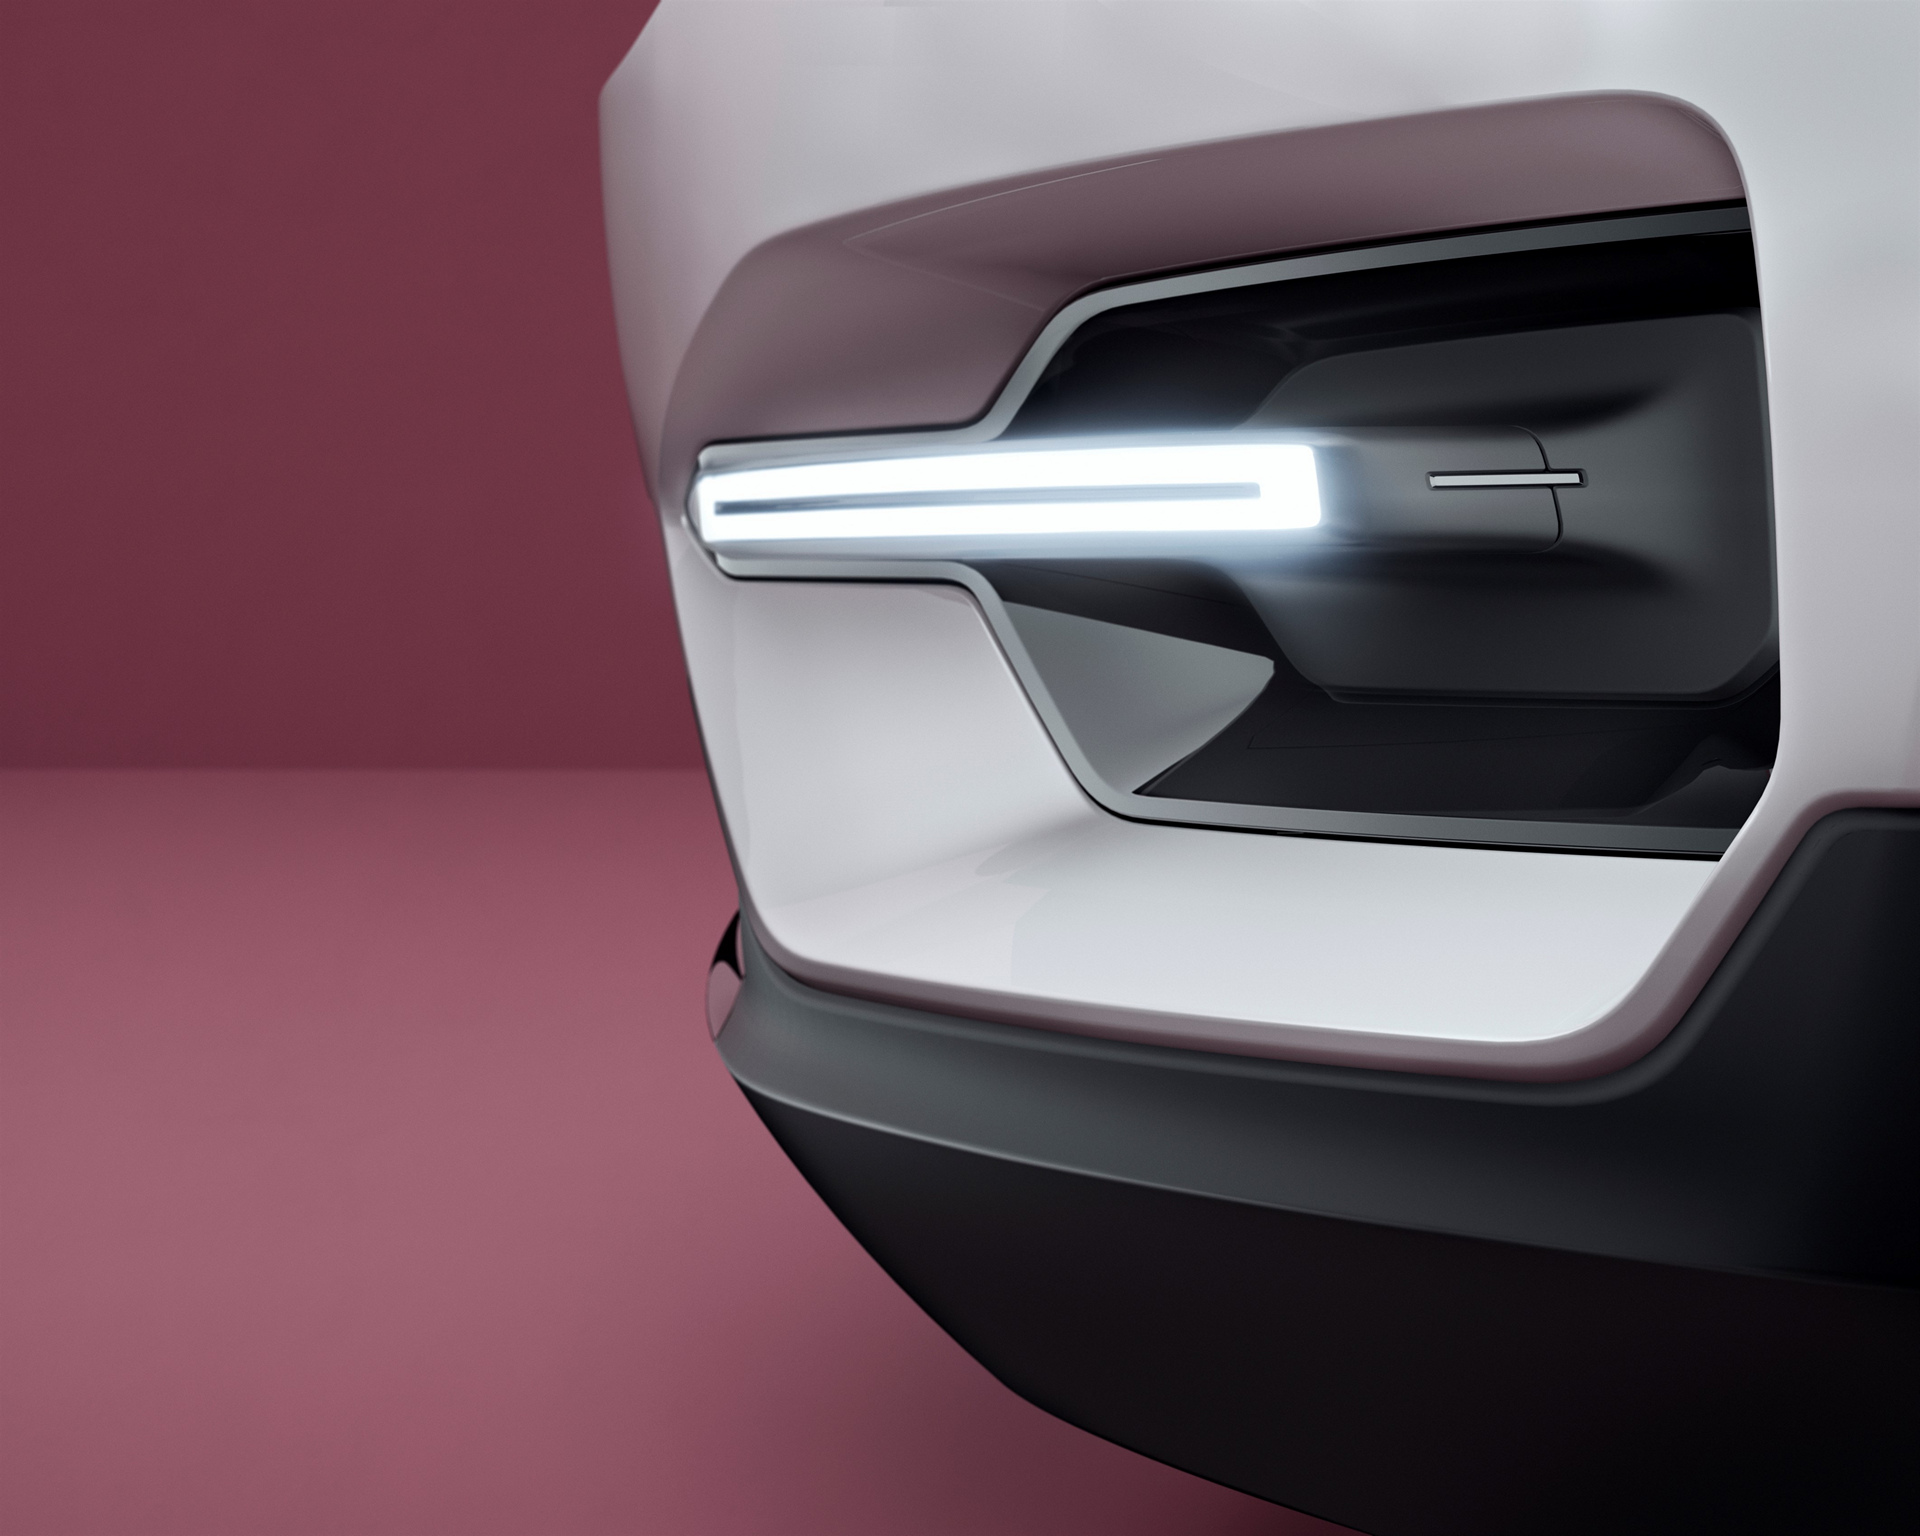 Volvo Cars' Concept 40.1 © Zhejiang Geely Holding Group Co., Ltd